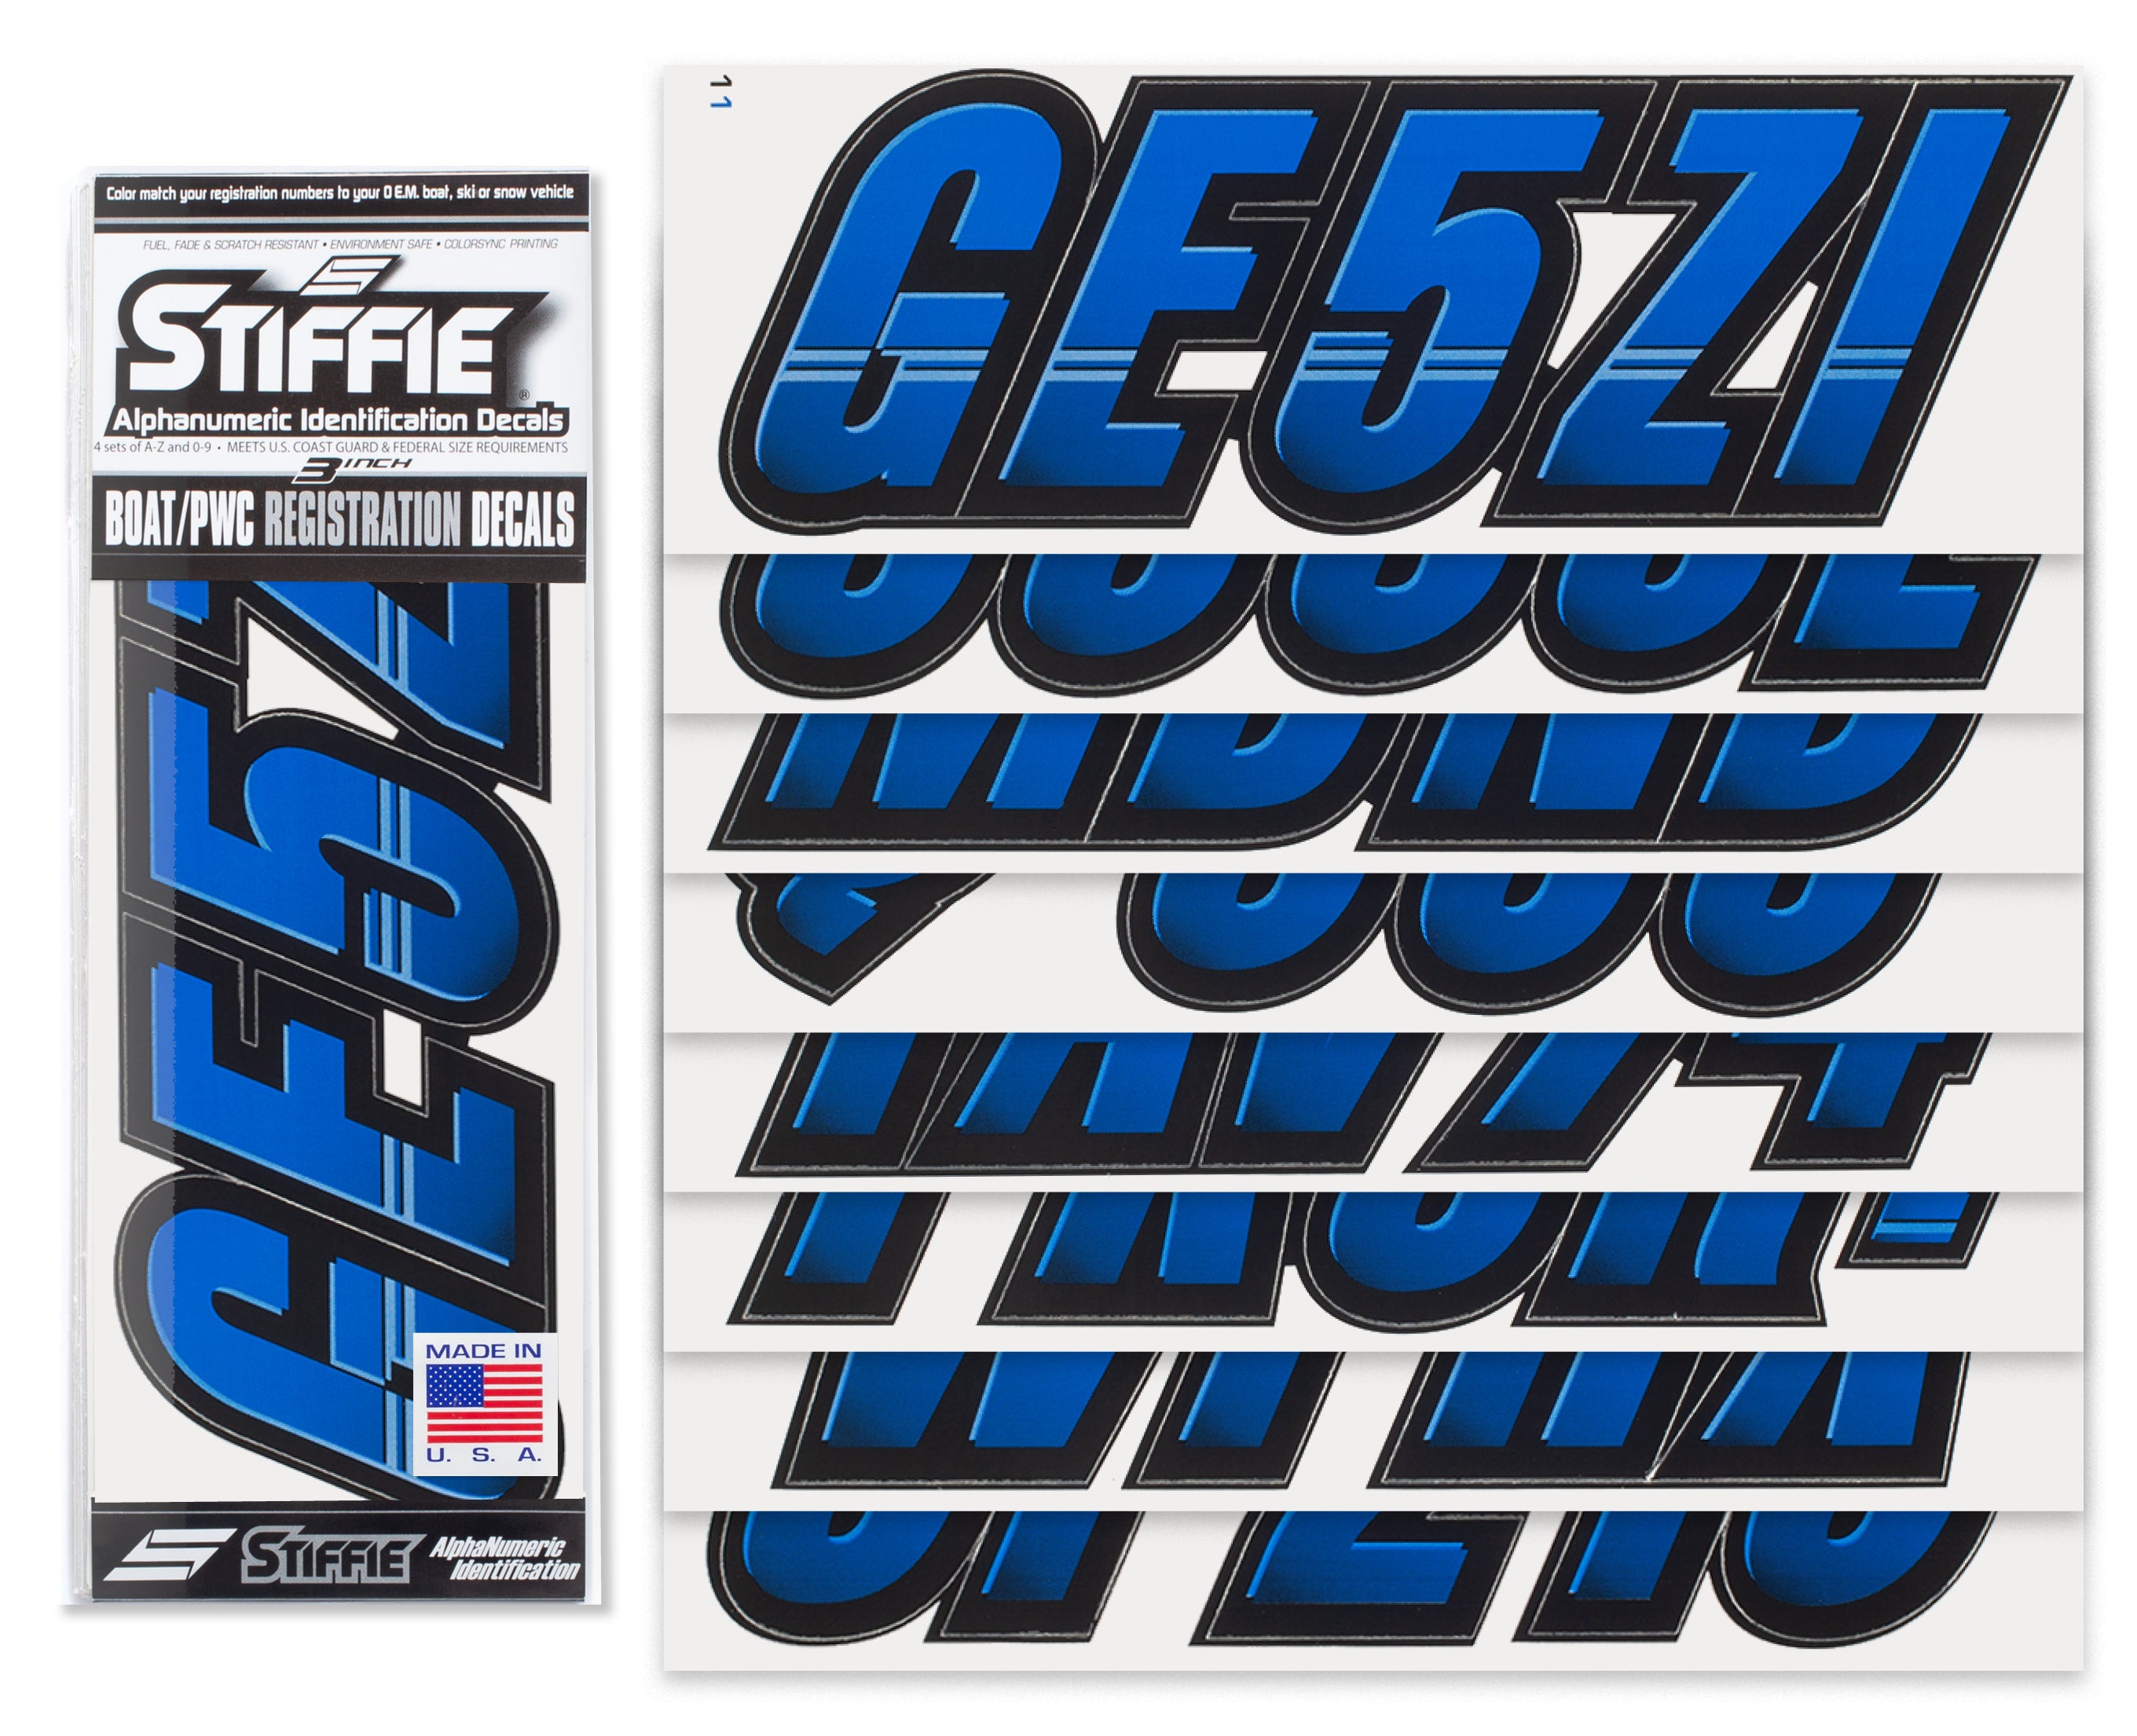 STIFFIE Techtron Blue/Black 3" Alpha-Numeric Registration Identification Numbers Stickers Decals for Boats & Personal Watercraft